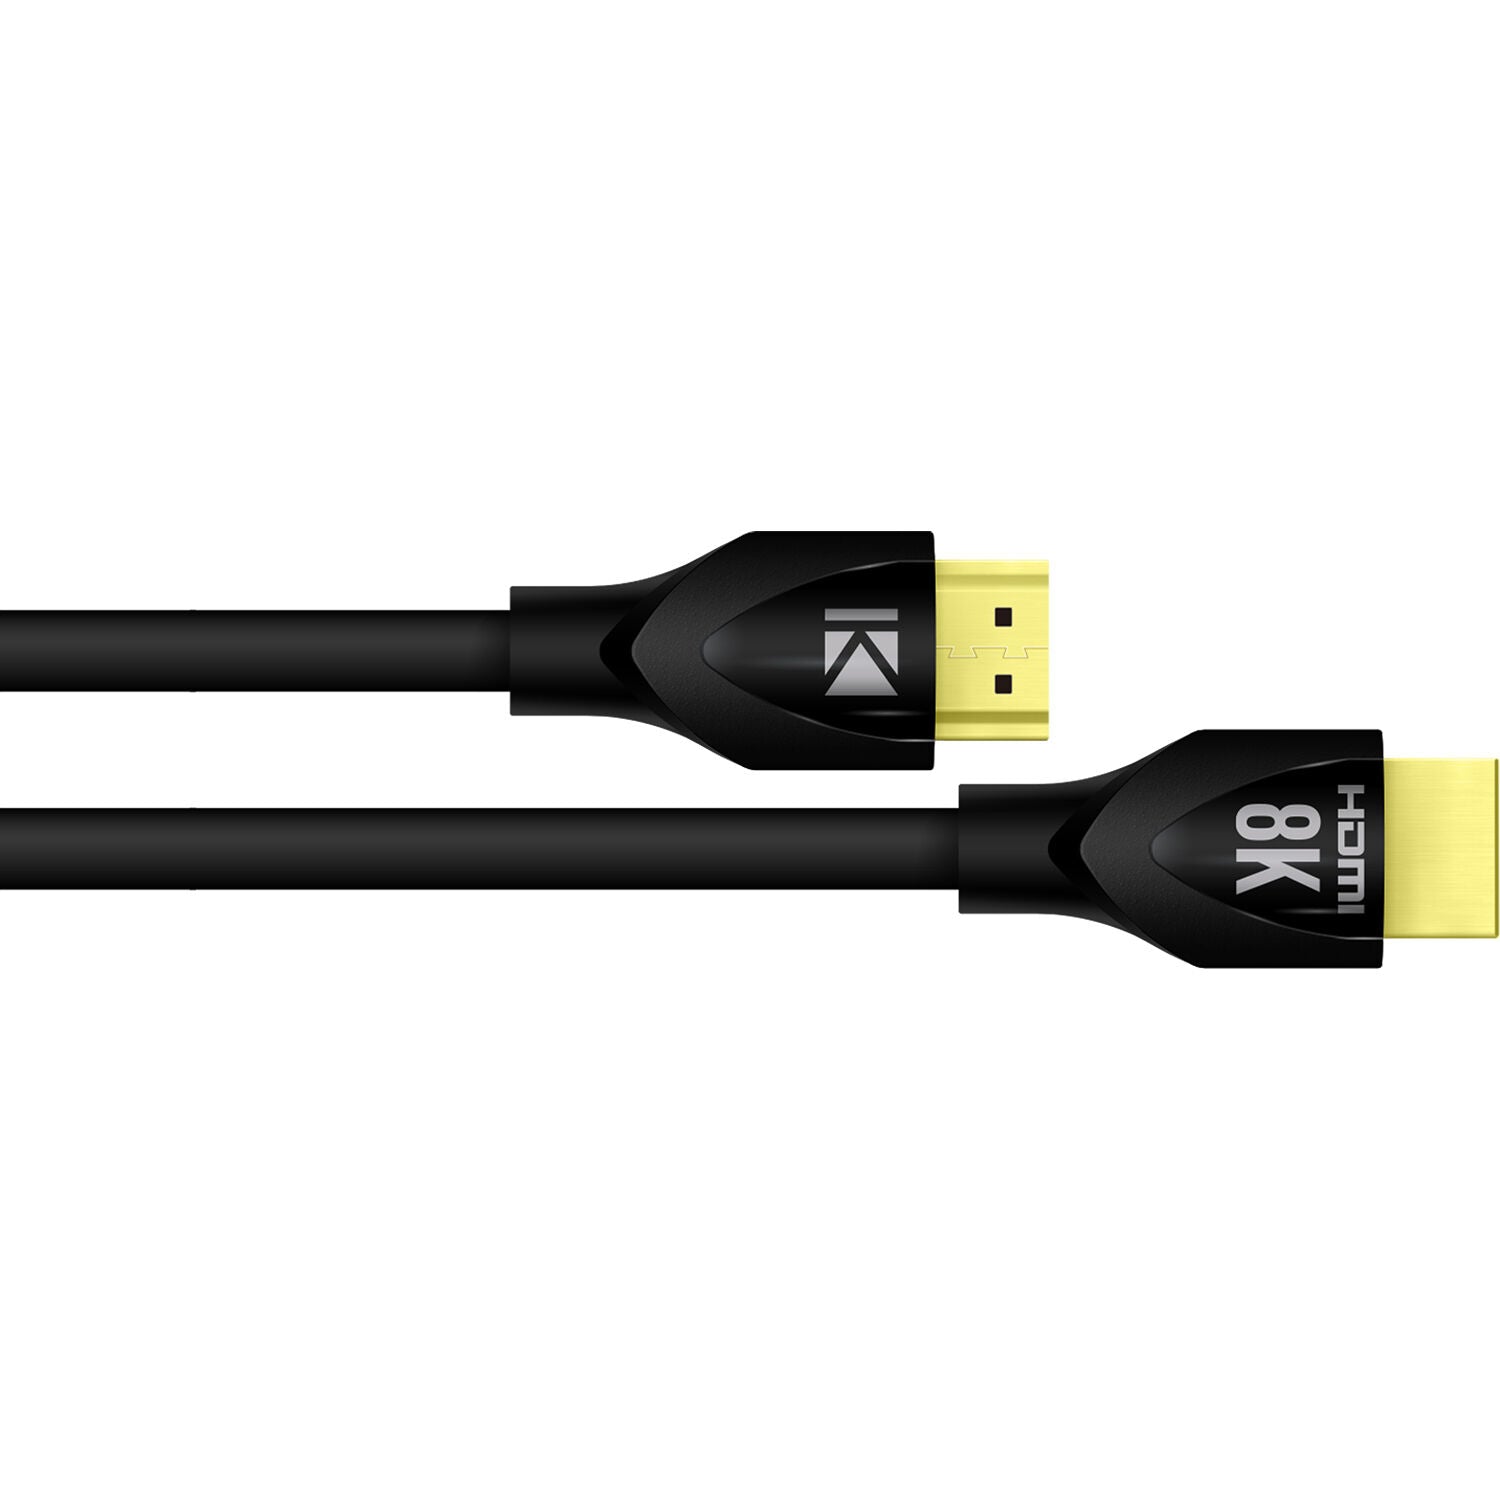 Key Digital 8K/48G HDMI Cable with HDCP2.3, eARC, 30 AWG - 3 Feet